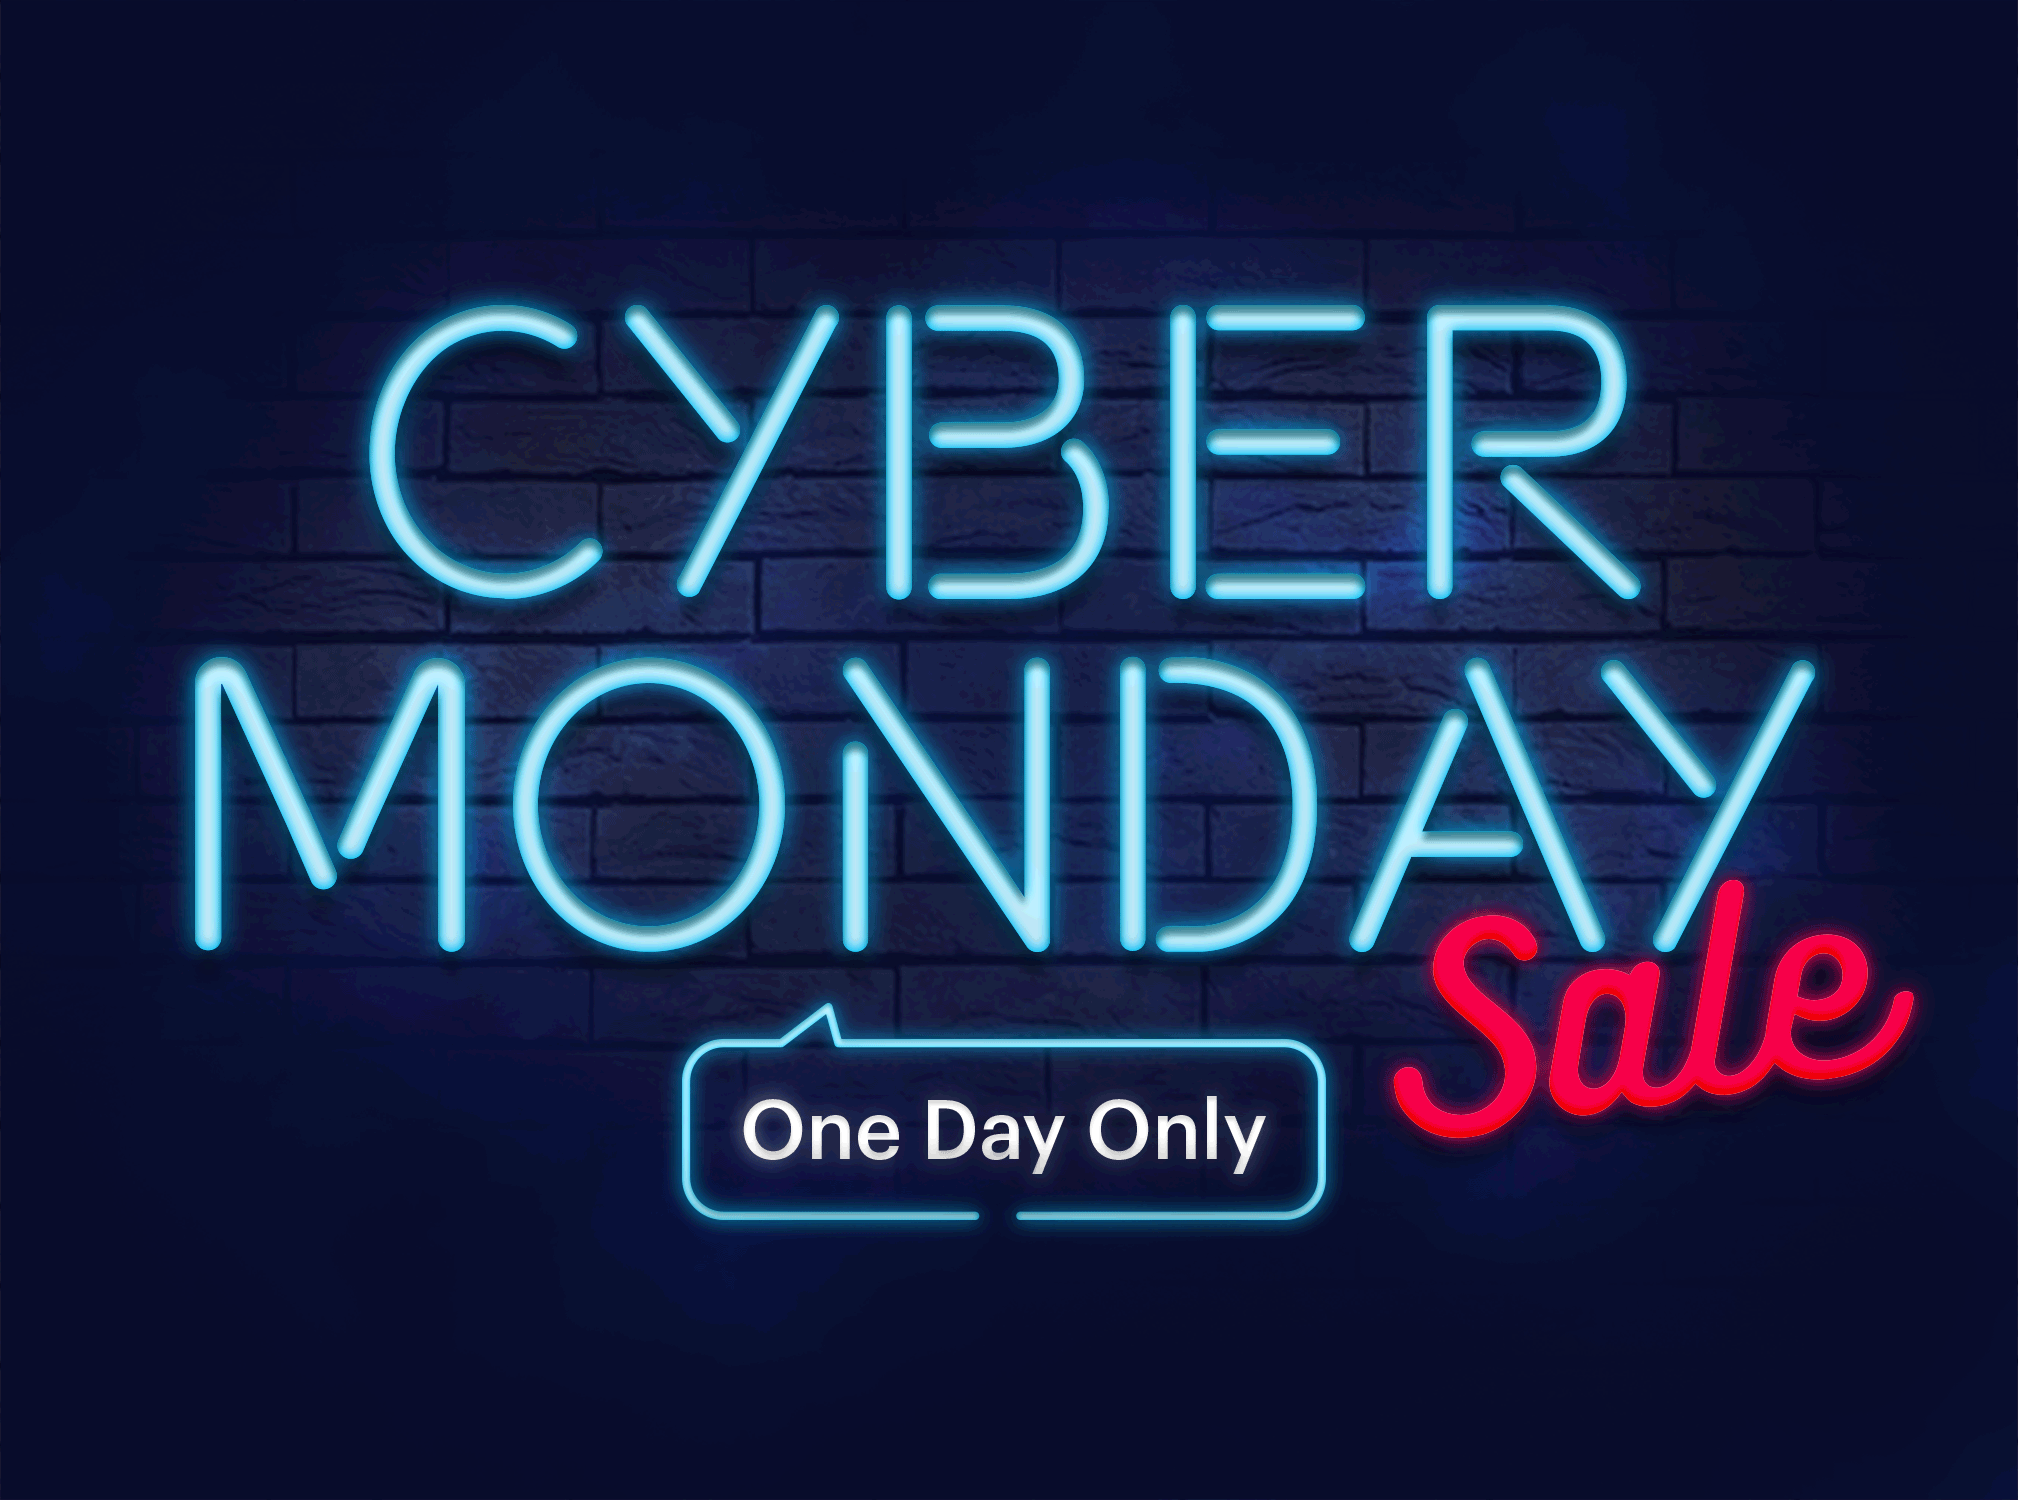 A graphic design campaign lockup for home for the Cyber Monday Sale